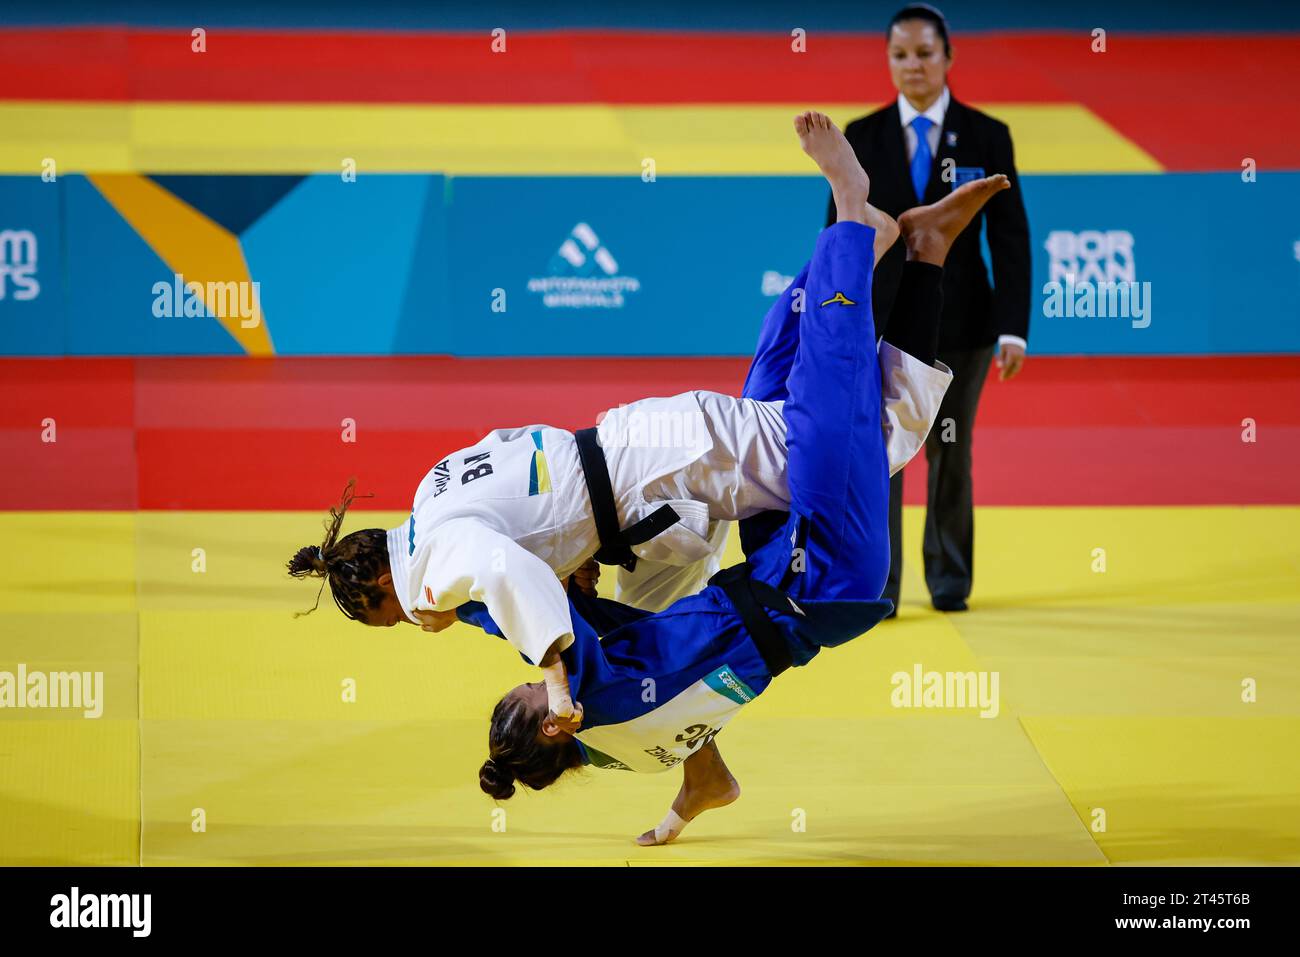 Rafaela Silva from Brazil strikes Argentina's GOMEZ Brisa Candela as she wins gold in Judo up to 57kg during the Santiago 2023 Pan-American Games taking place this Saturday morning (28), at the contact sports center in Santiago de Chile. ((134) Rodolfo Buhrer/La Imagem/Fotoarena/SPP) ((134) Rodolfo Buhrer/La Imagem/Fotoarena/SPP) Credit: SPP Sport Press Photo. /Alamy Live News Stock Photo